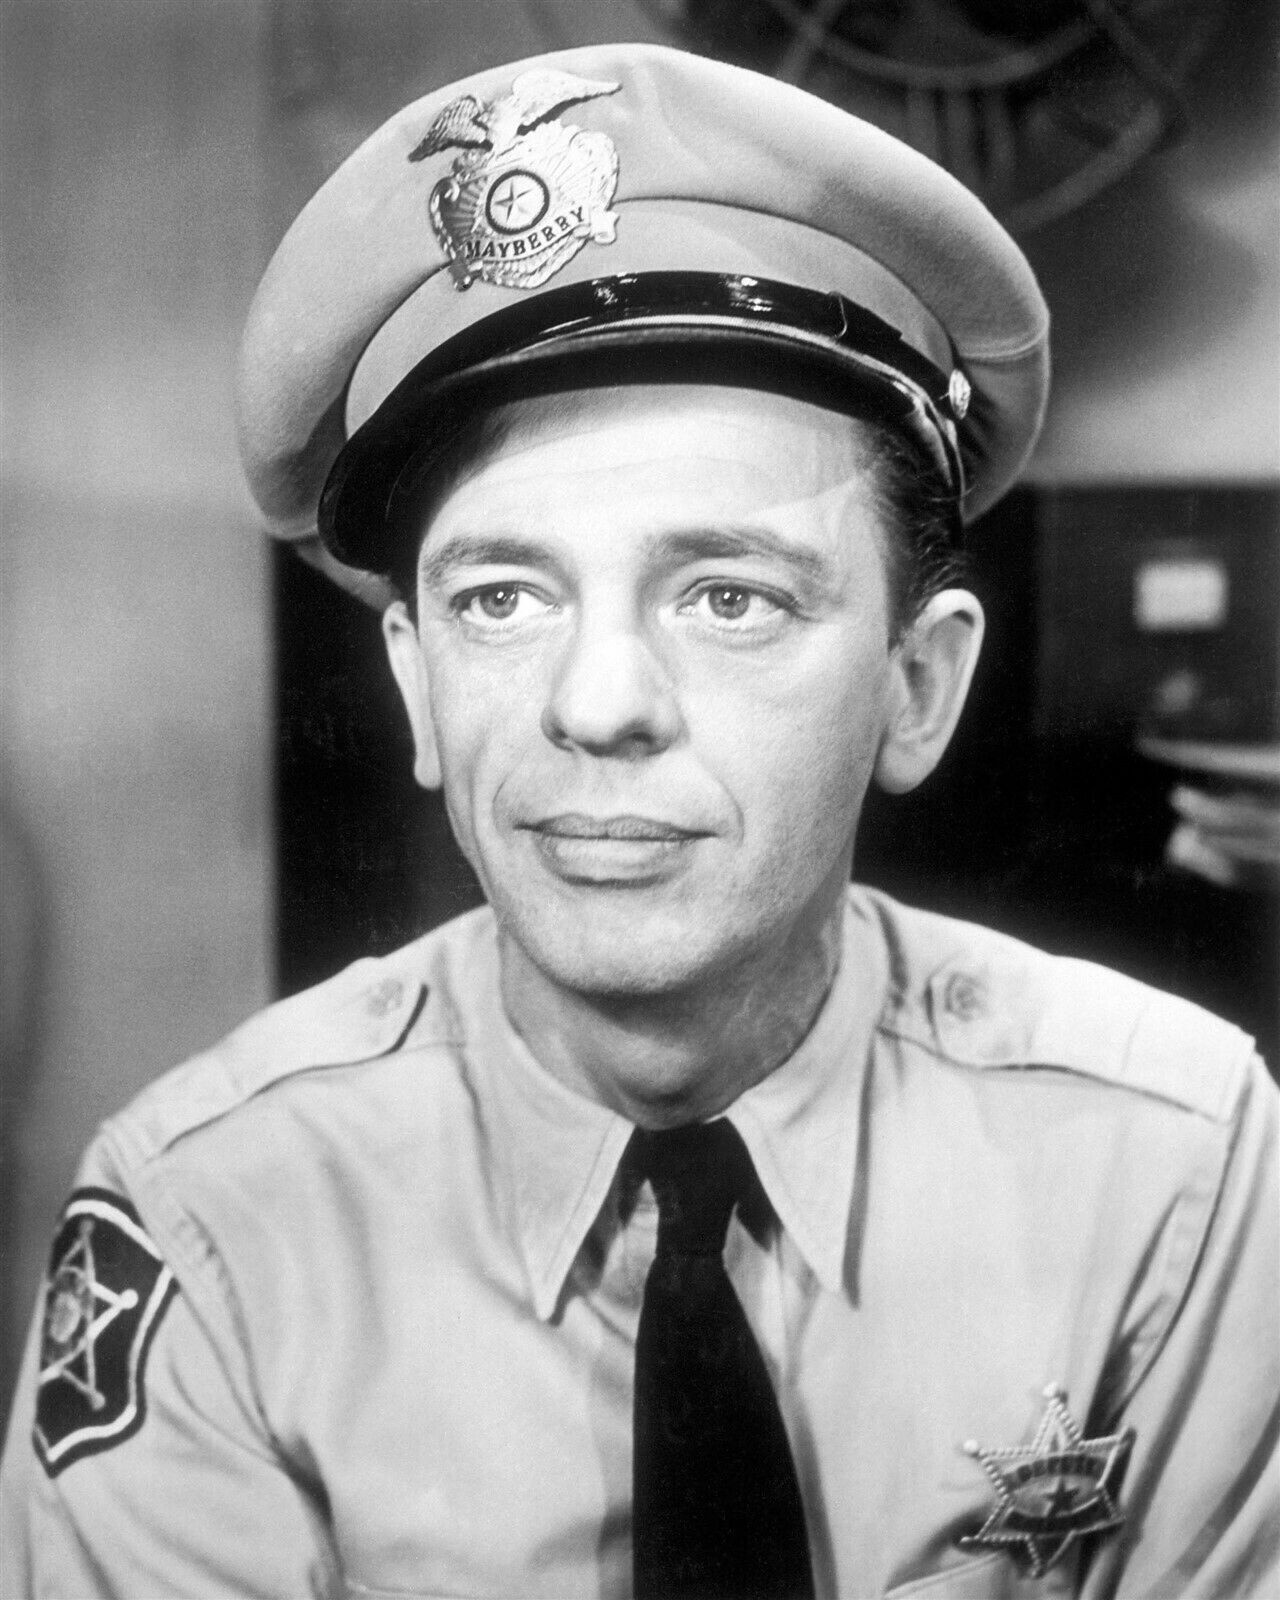 Don Knotts as Barney Fife in police uniform Andy Griffith Show 16x20 poster